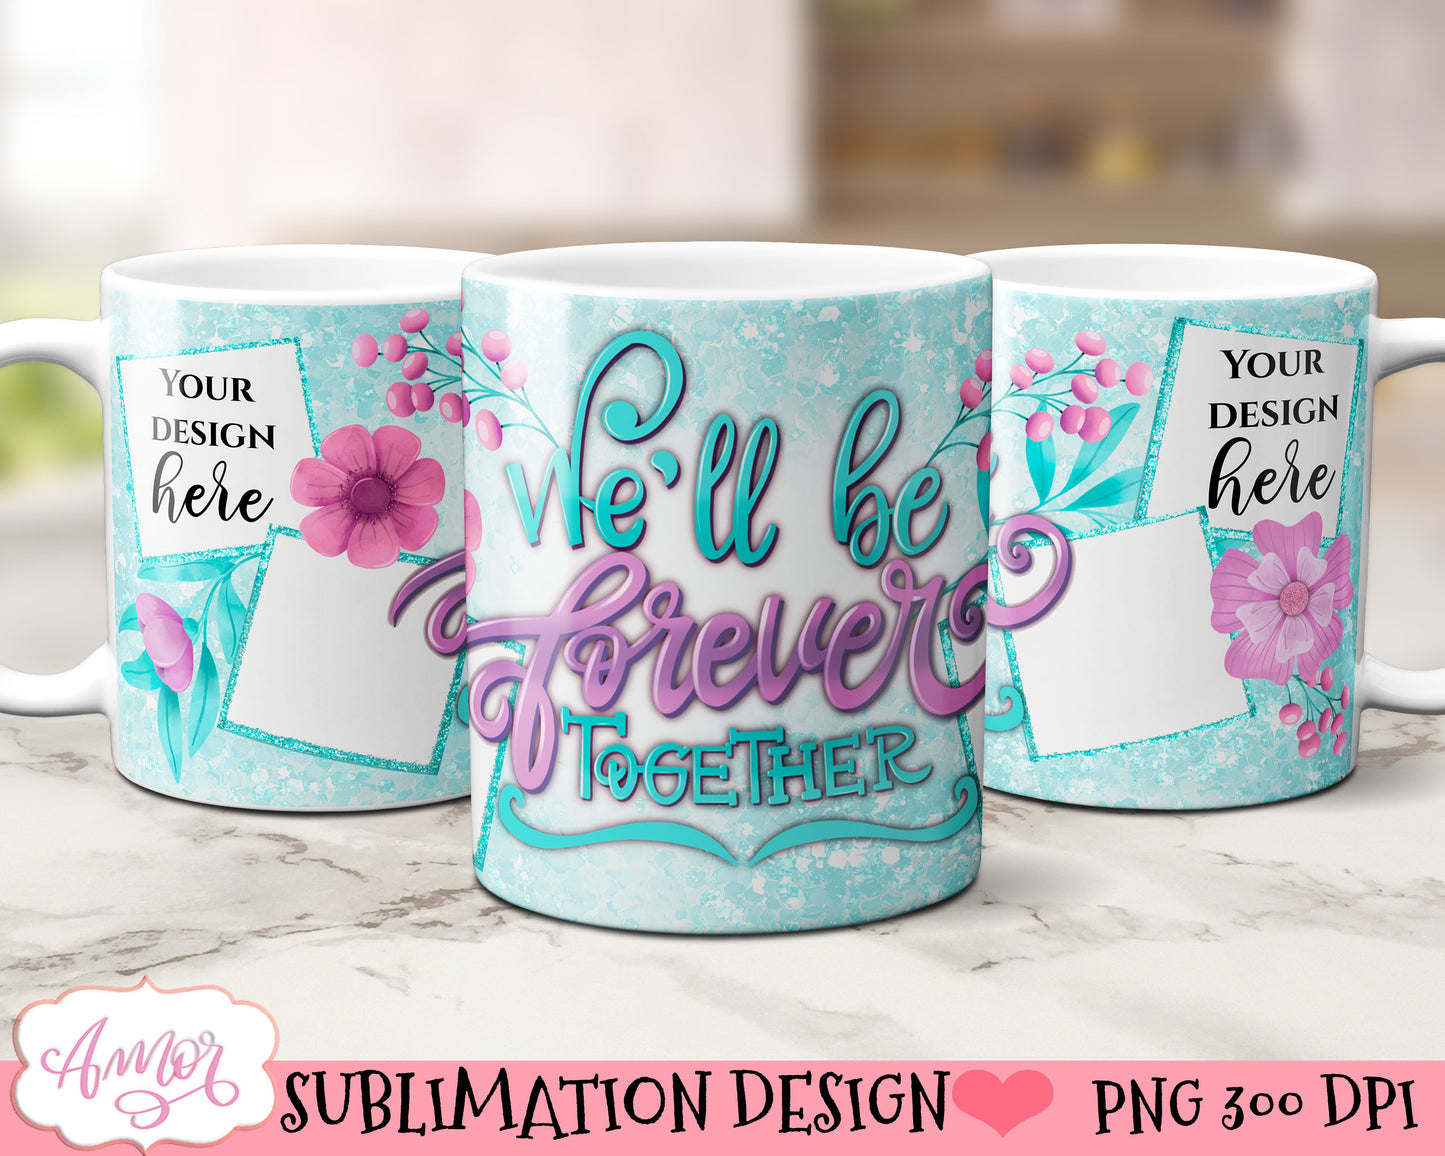 We will be forever together photo mug wrap PNG for sublimation